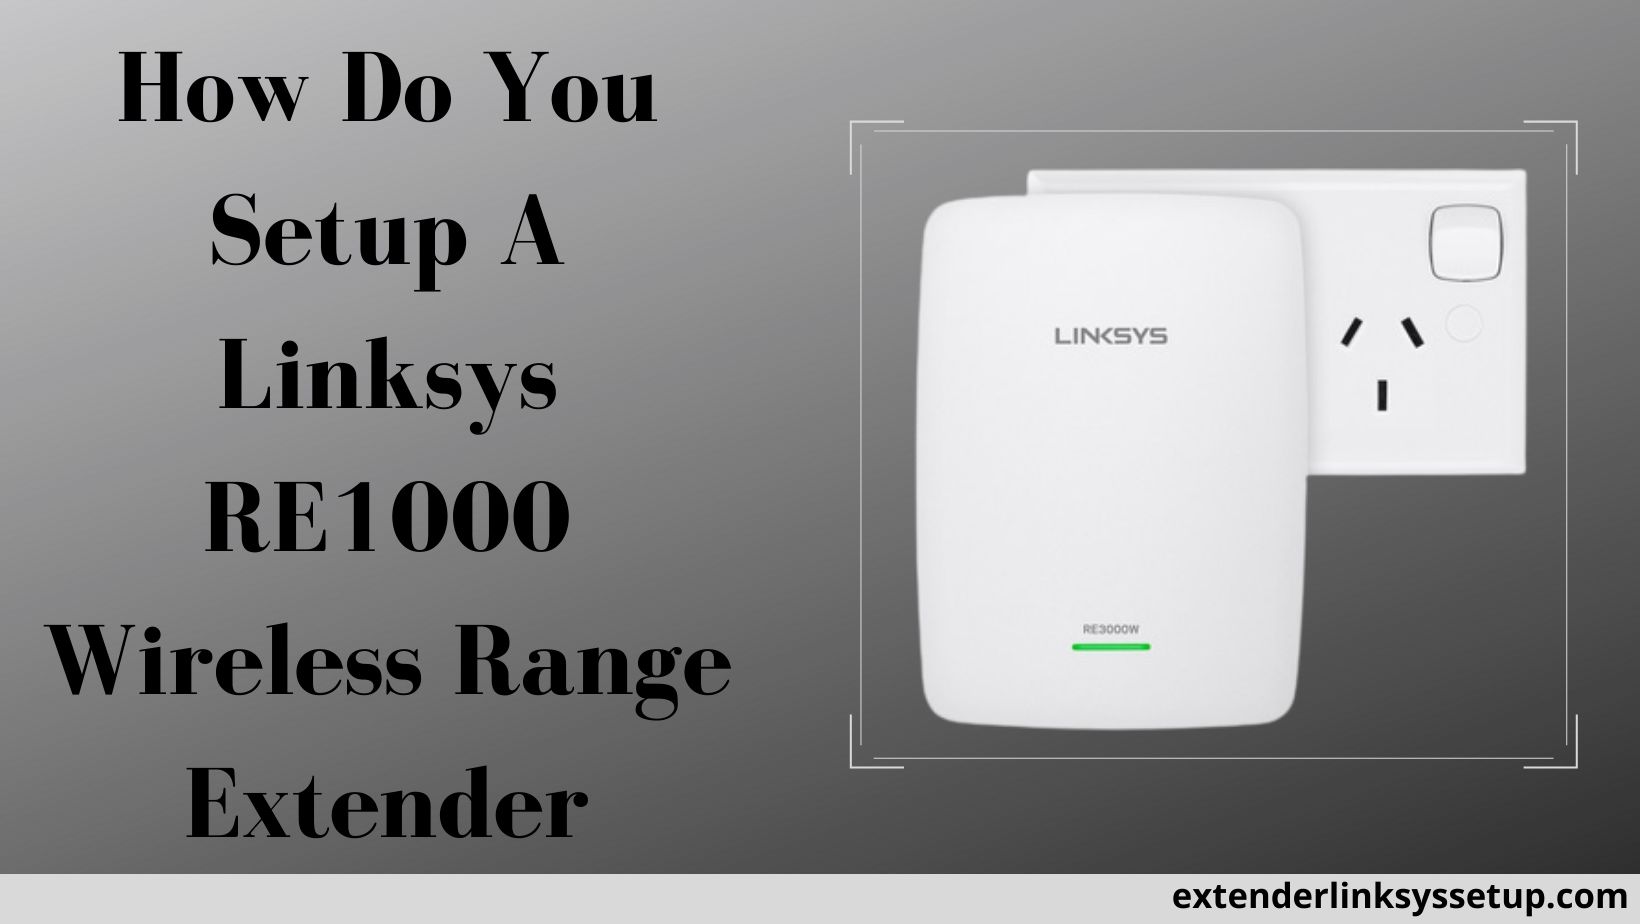 How to Setup A Linksys RE1000 Wireless Range Extender